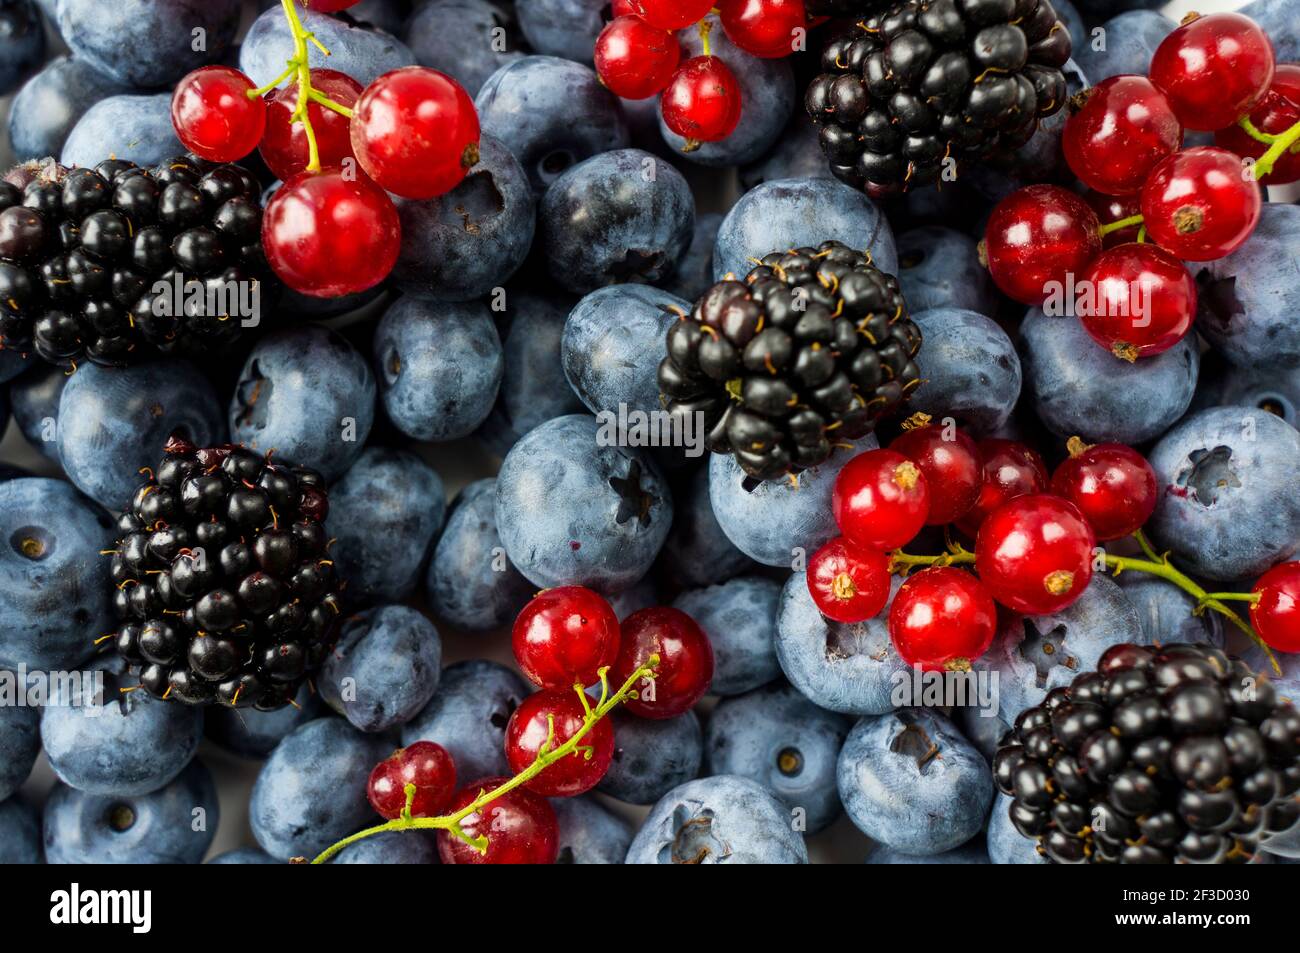 Mix berries and fruits. Ripe blackberries, blueberries, blackcurrants, red currants. Top view. Background berries and fruits. Various fresh summer fru Stock Photo